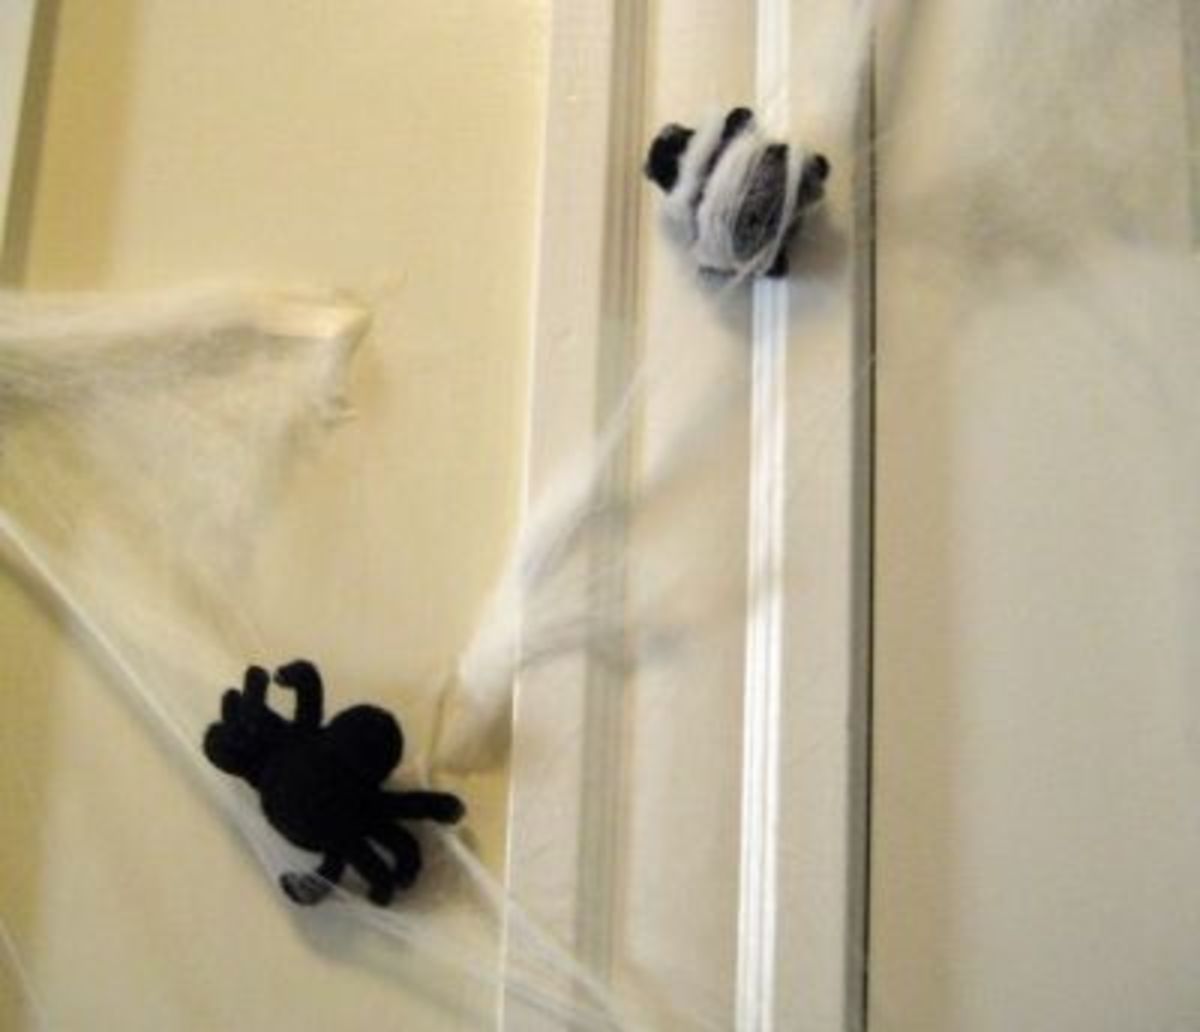 Halloween 2010:  The fly got caught in the web, and the spider is ready to take him down!